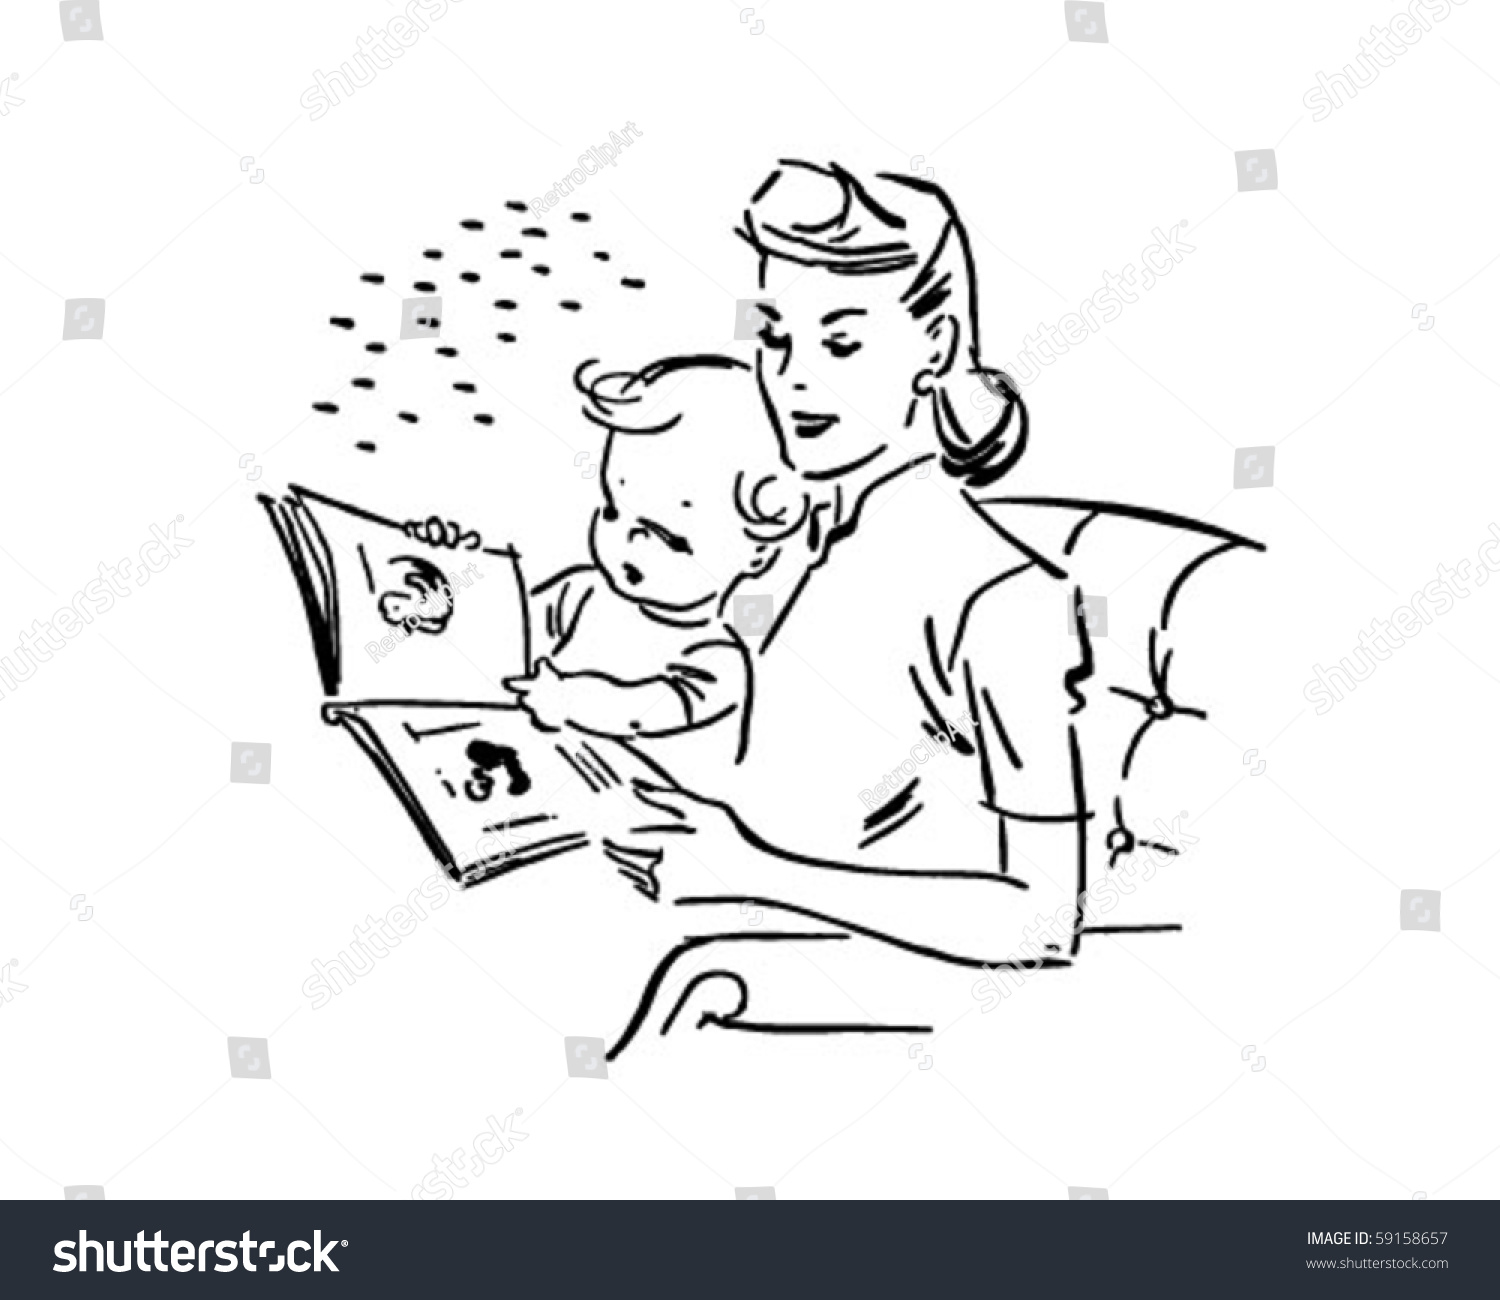 mother reading clipart - photo #37